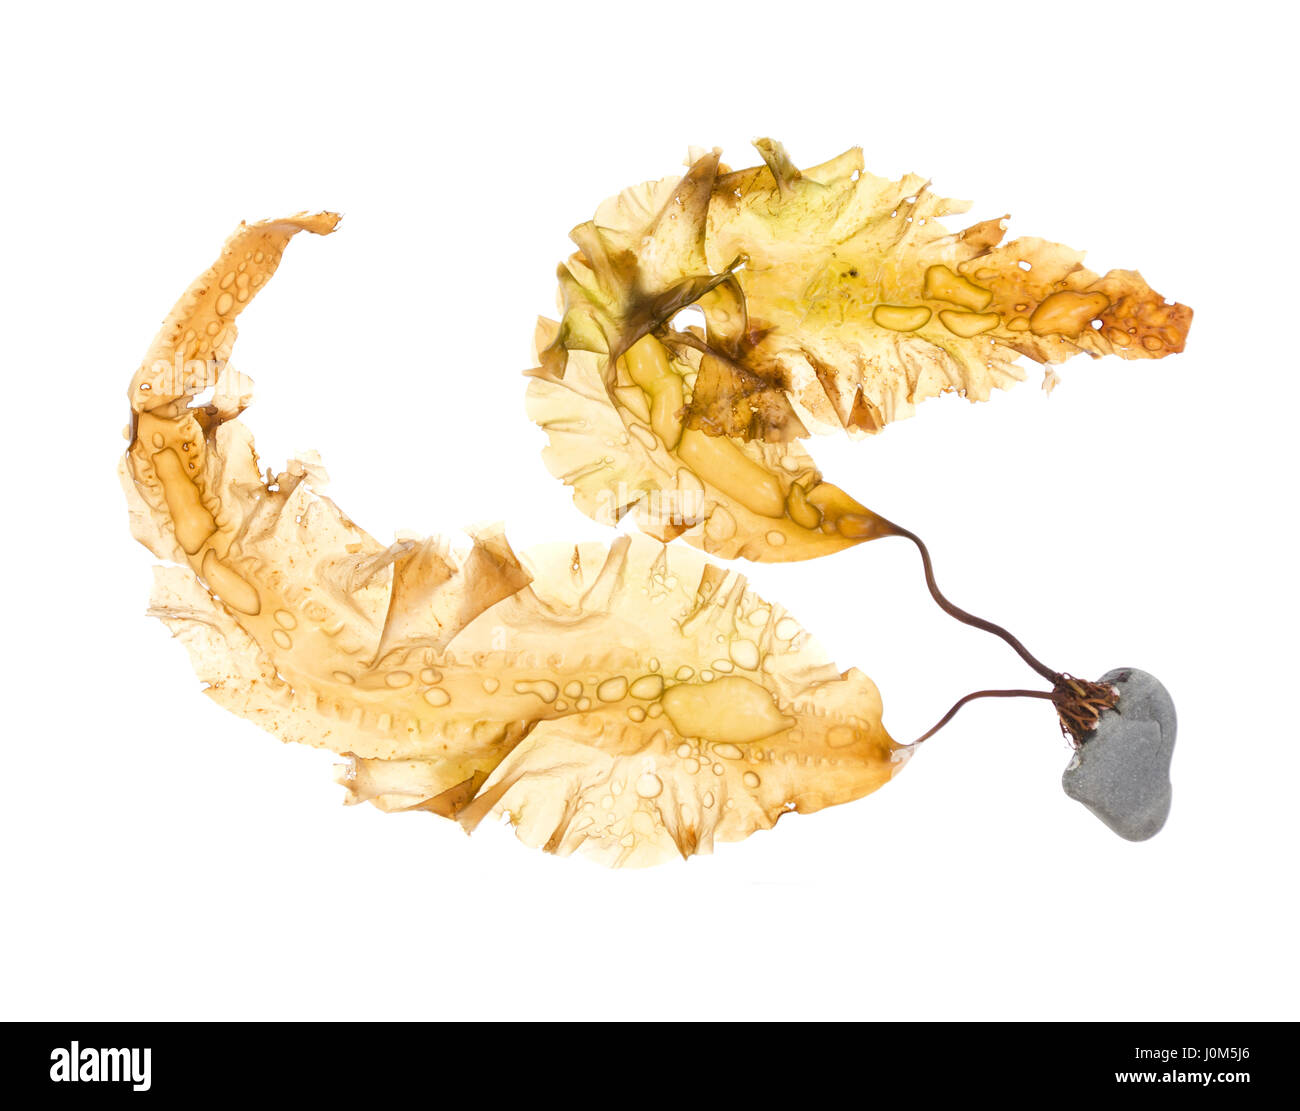 Saccharina latissima (Sugar Kelp) with holdfast attached to a rock; photographed on a light box/white background (horizontal orientation.) Stock Photo